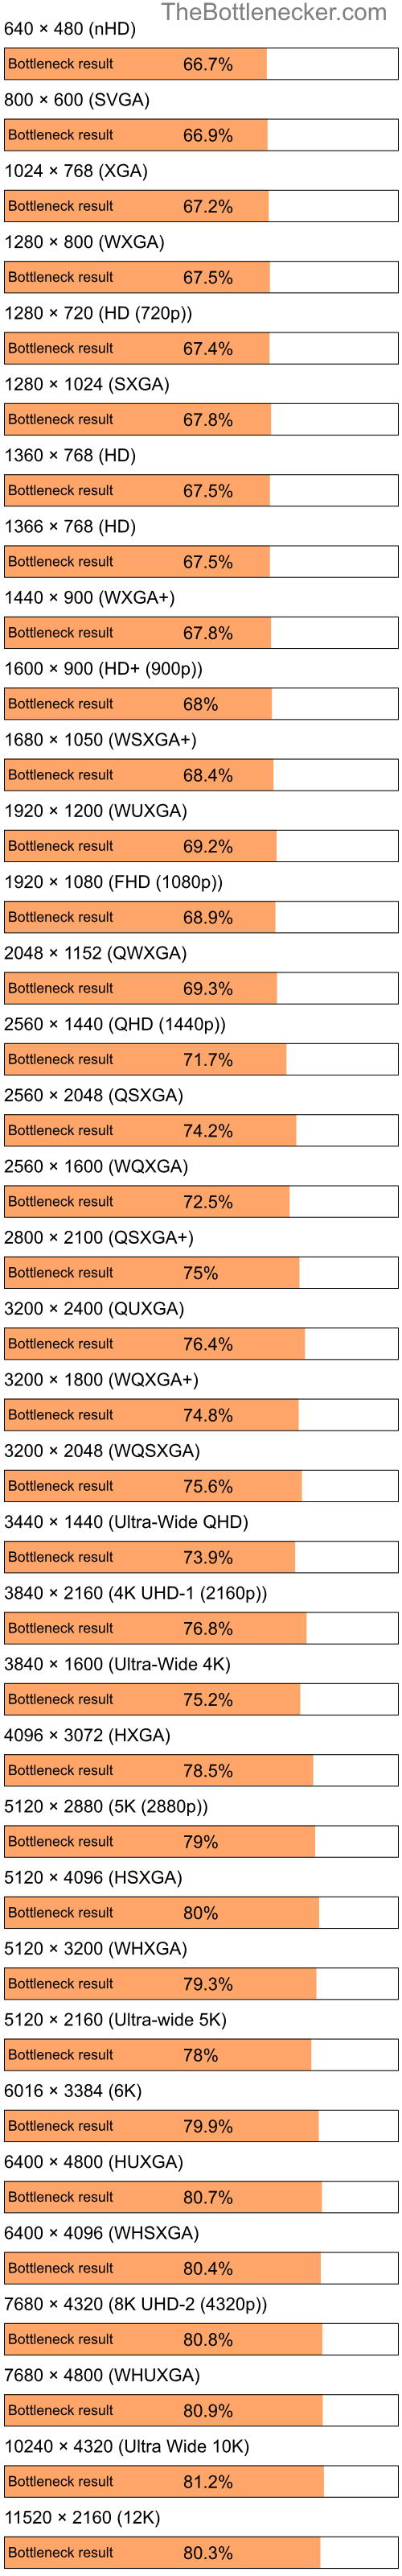 Bottleneck results by resolution for Intel Atom N280 and AMD Radeon HD 6250 in7 Days to Die